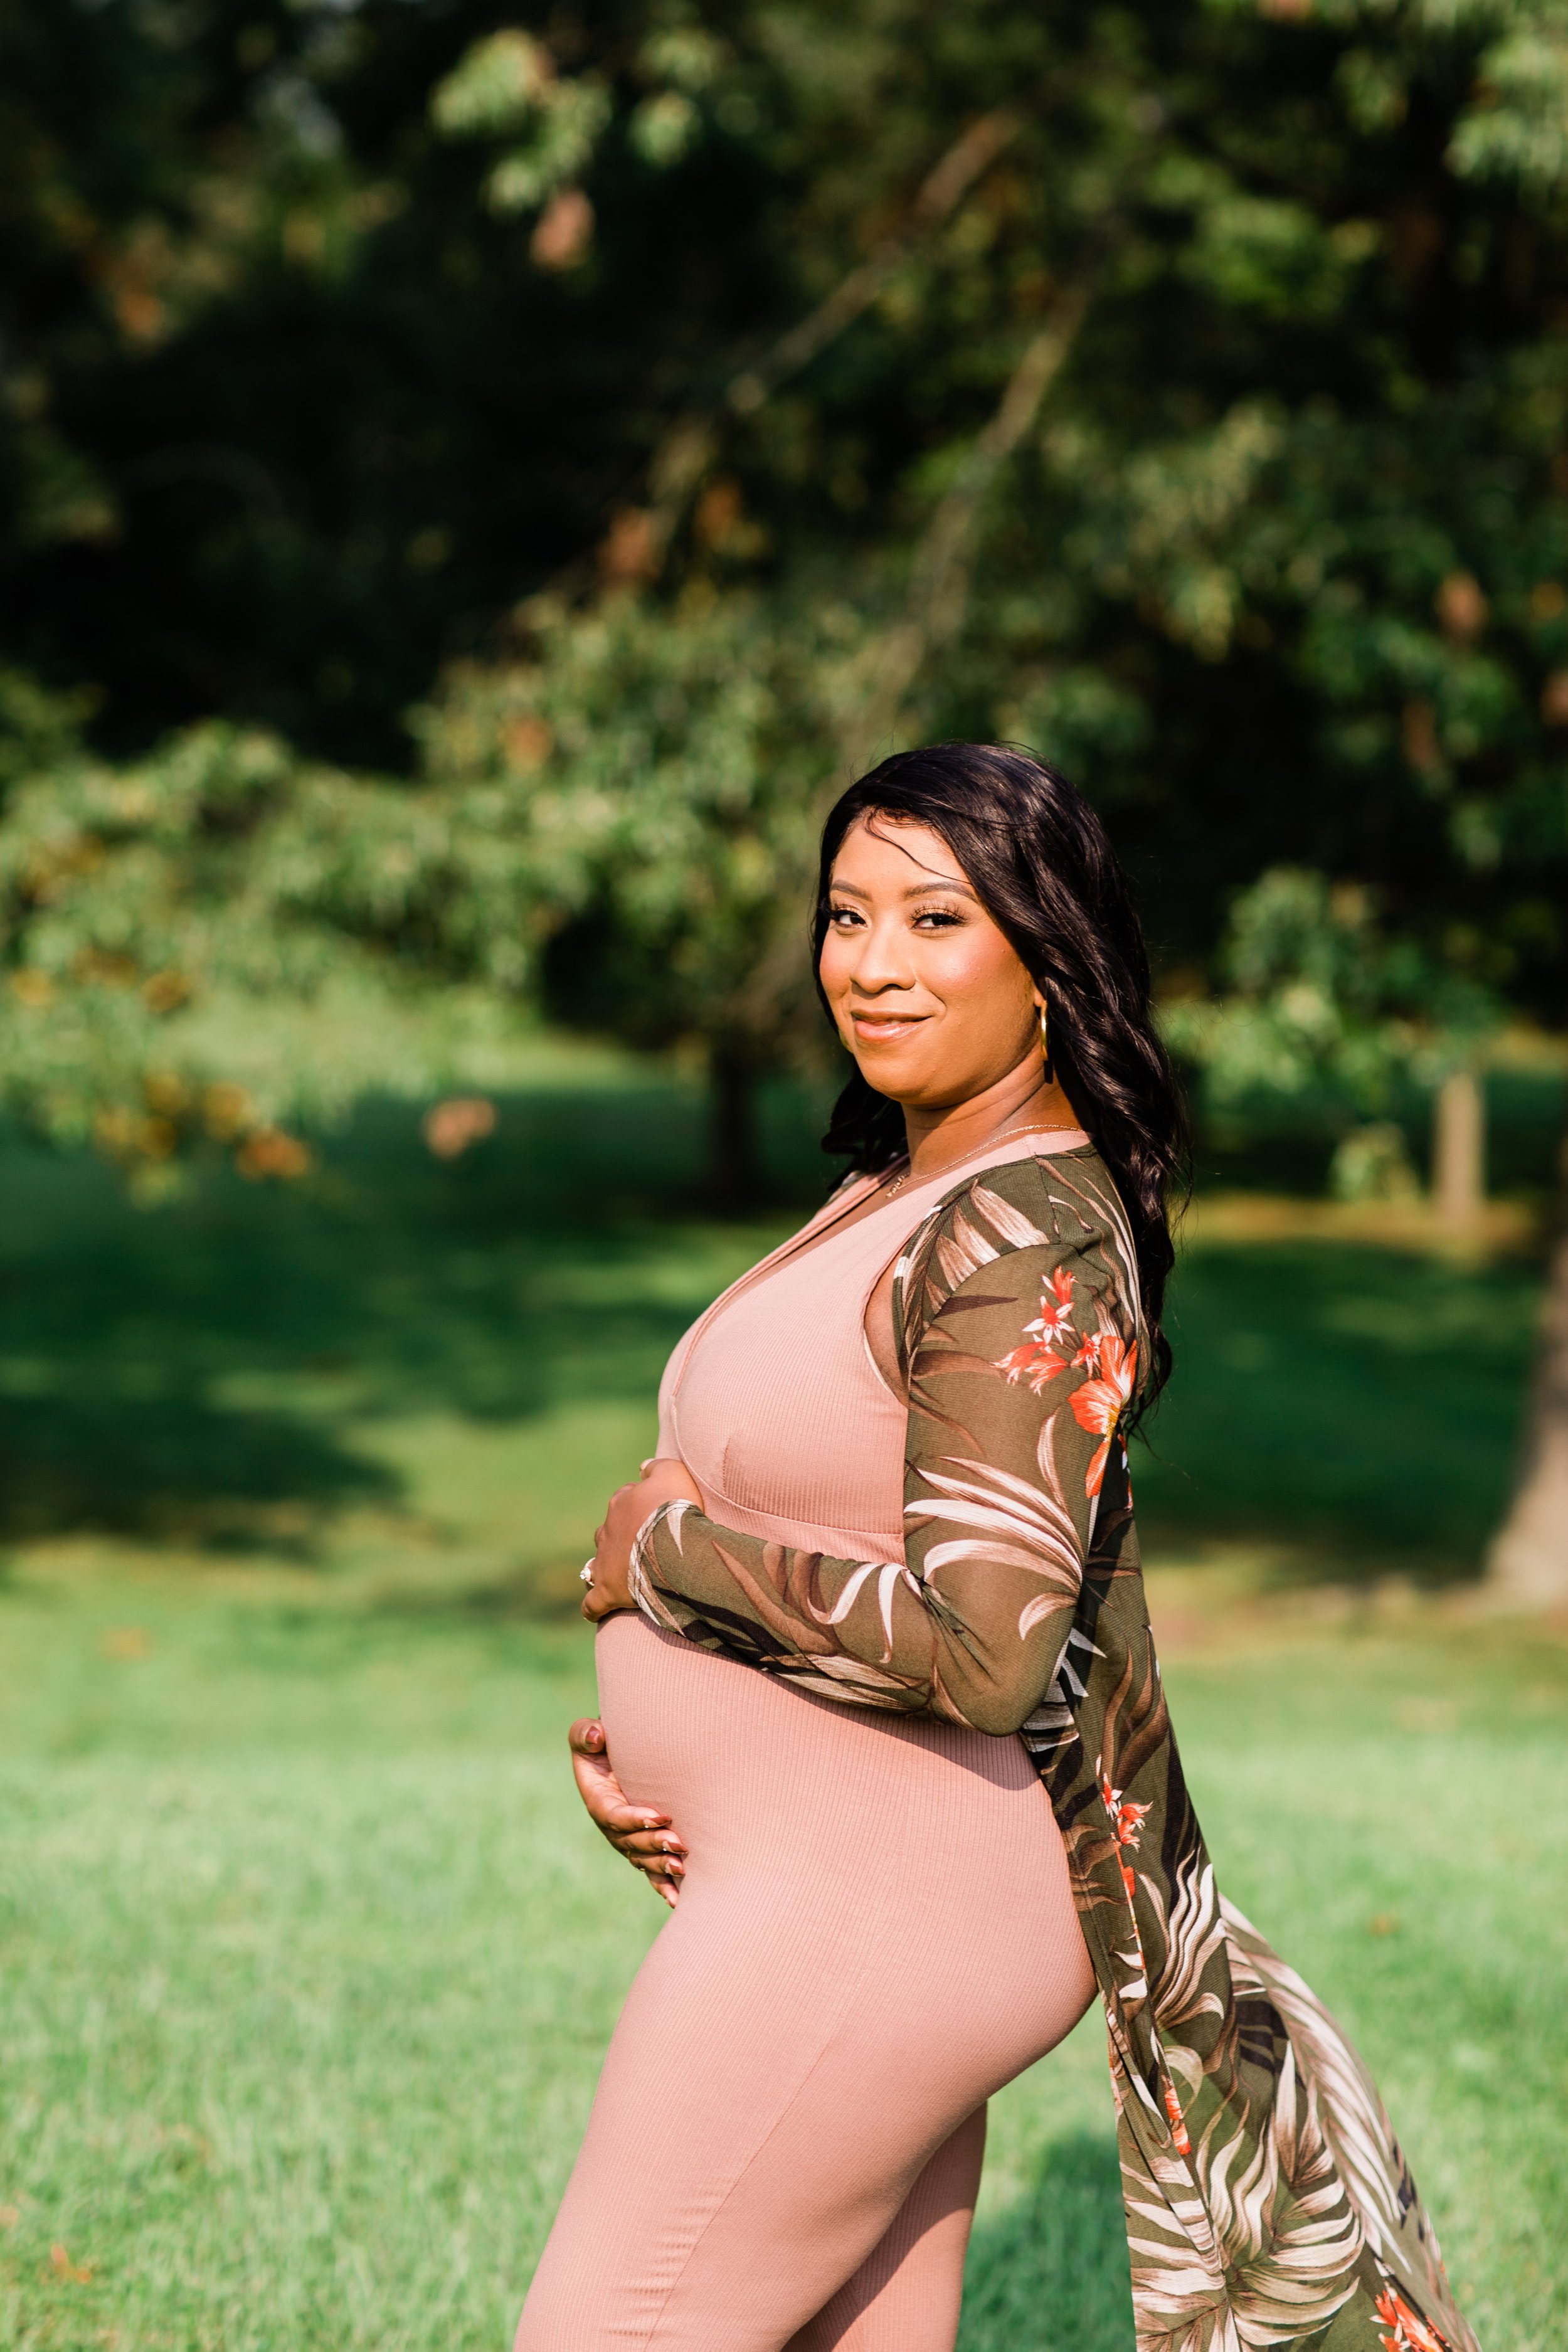 Baltimore's Best Black Wedding Photographers Megapixels Media Photography Engagement and Maternity Putty Hill Park-11.jpg